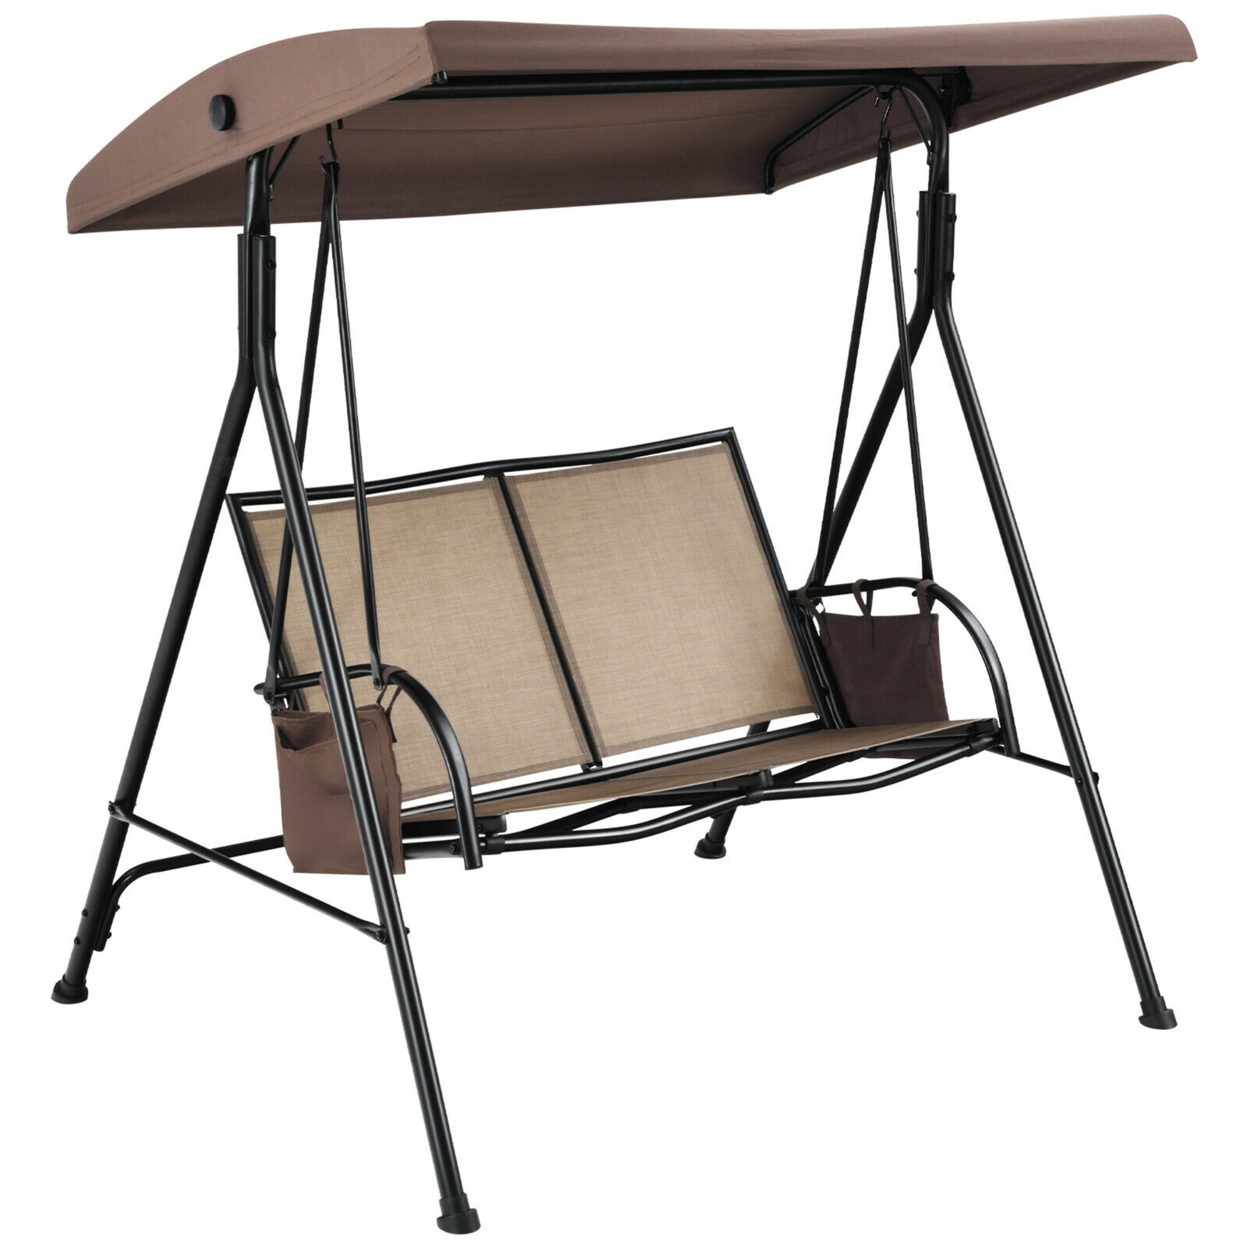 2-Person Adjustable Canopy Swing Chair Patio Outdoor W/ 2 Storage Pockets